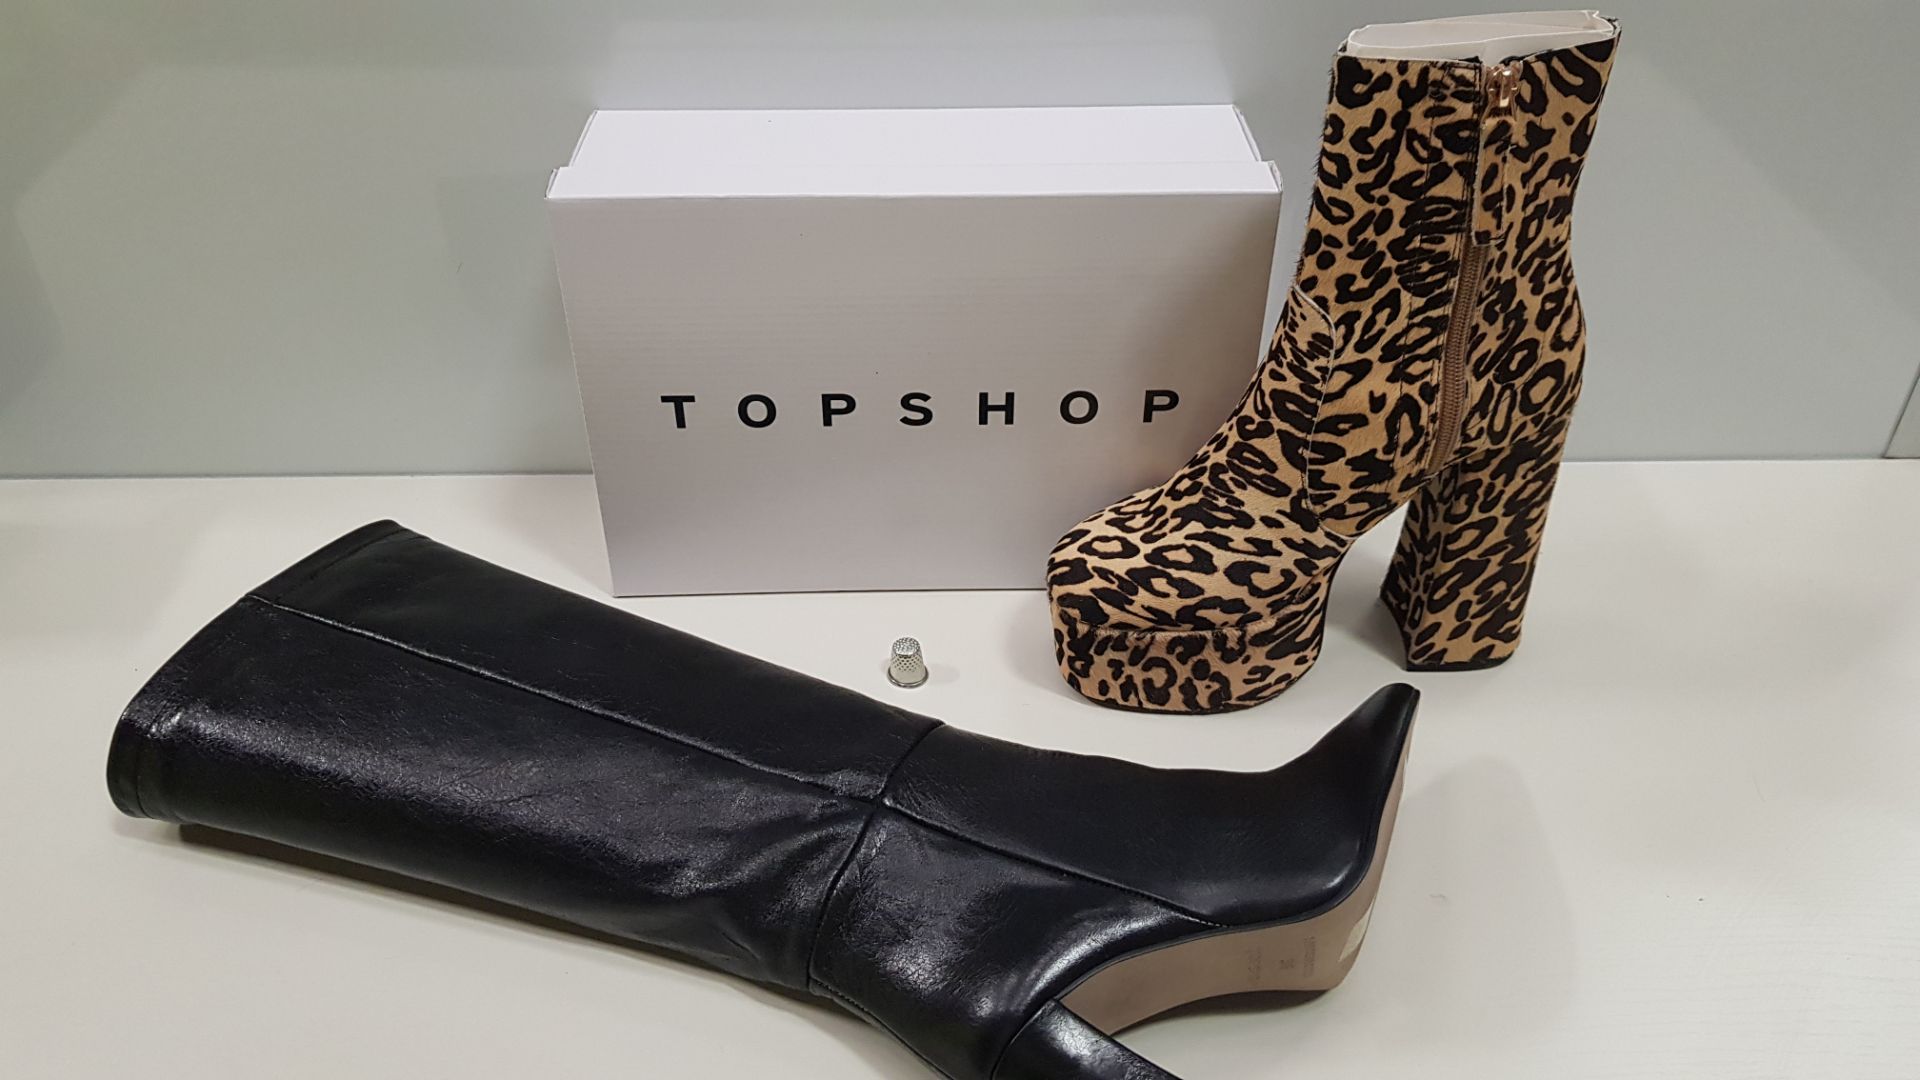 6 X BRAND NEW TOPSHOP SHOES - TAYLOR BLACK KNEE HIGH BOOTS AND ELECTRIC TRUE LEOPARD HIGH SOLED